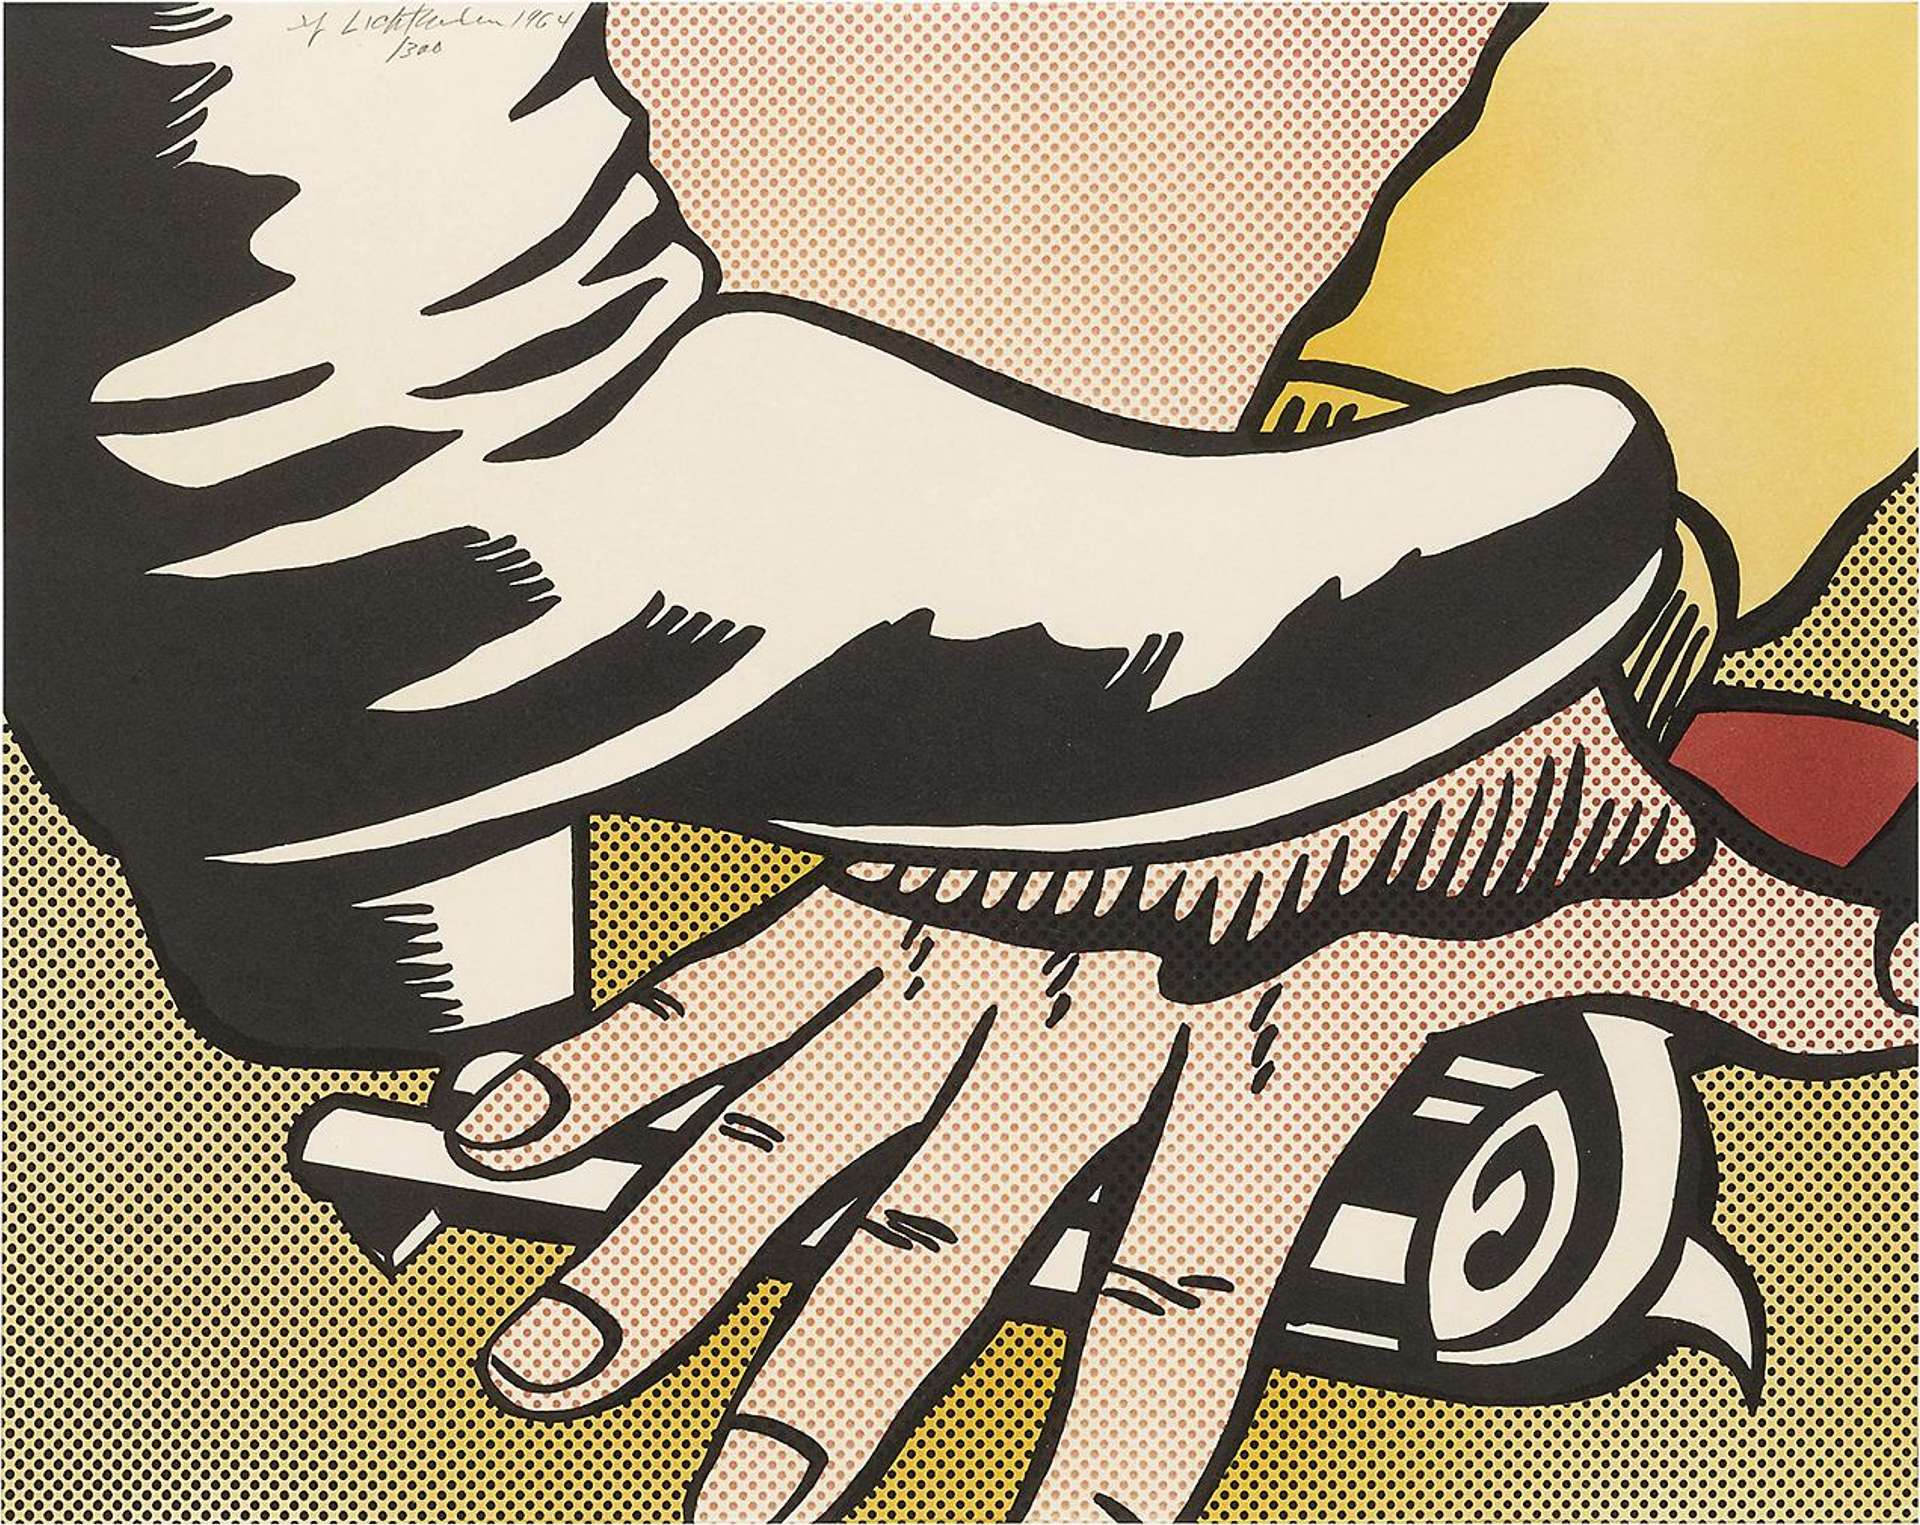 Lichtenstein captures the moment in which a booted foot stomps on a hand reaching for a gun. The colour palette is scarce but strong, while the minimal shading evokes a flattened surface appearance. Lichtenstein applies simple black outlines and Ben Day dots to delimit the volume and dimension of his shapes.